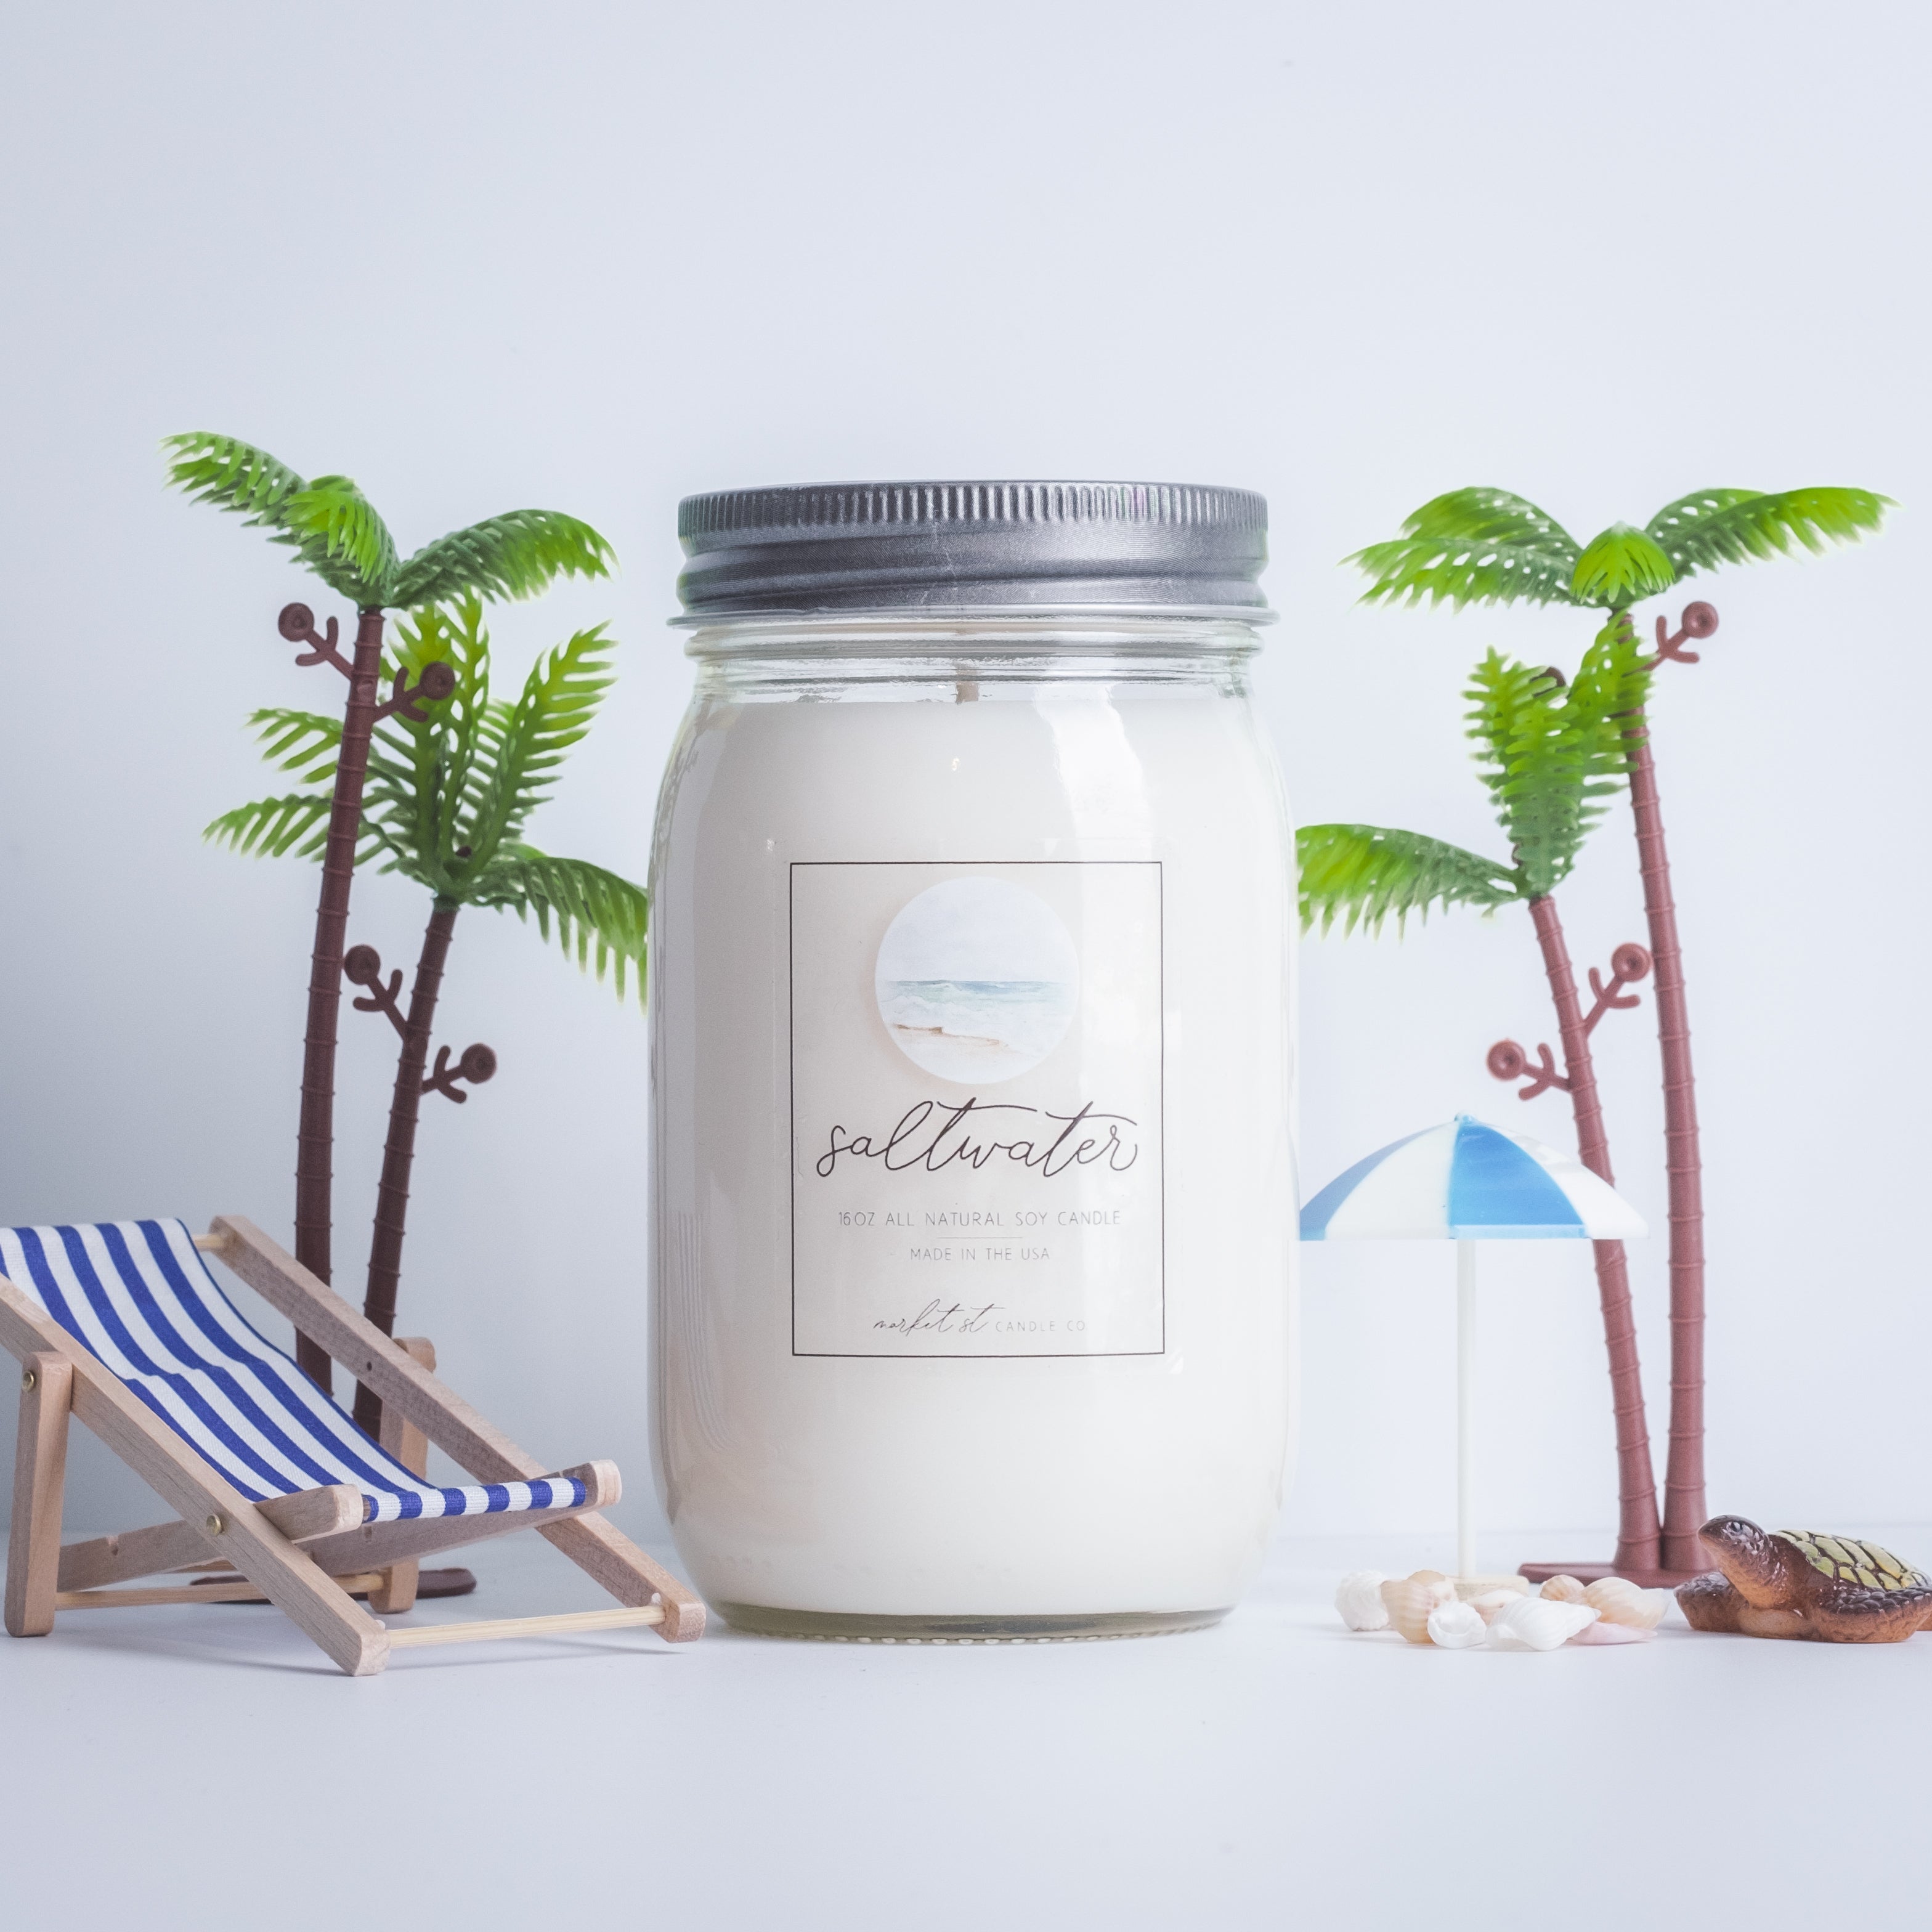 Salt Water Soy Candle